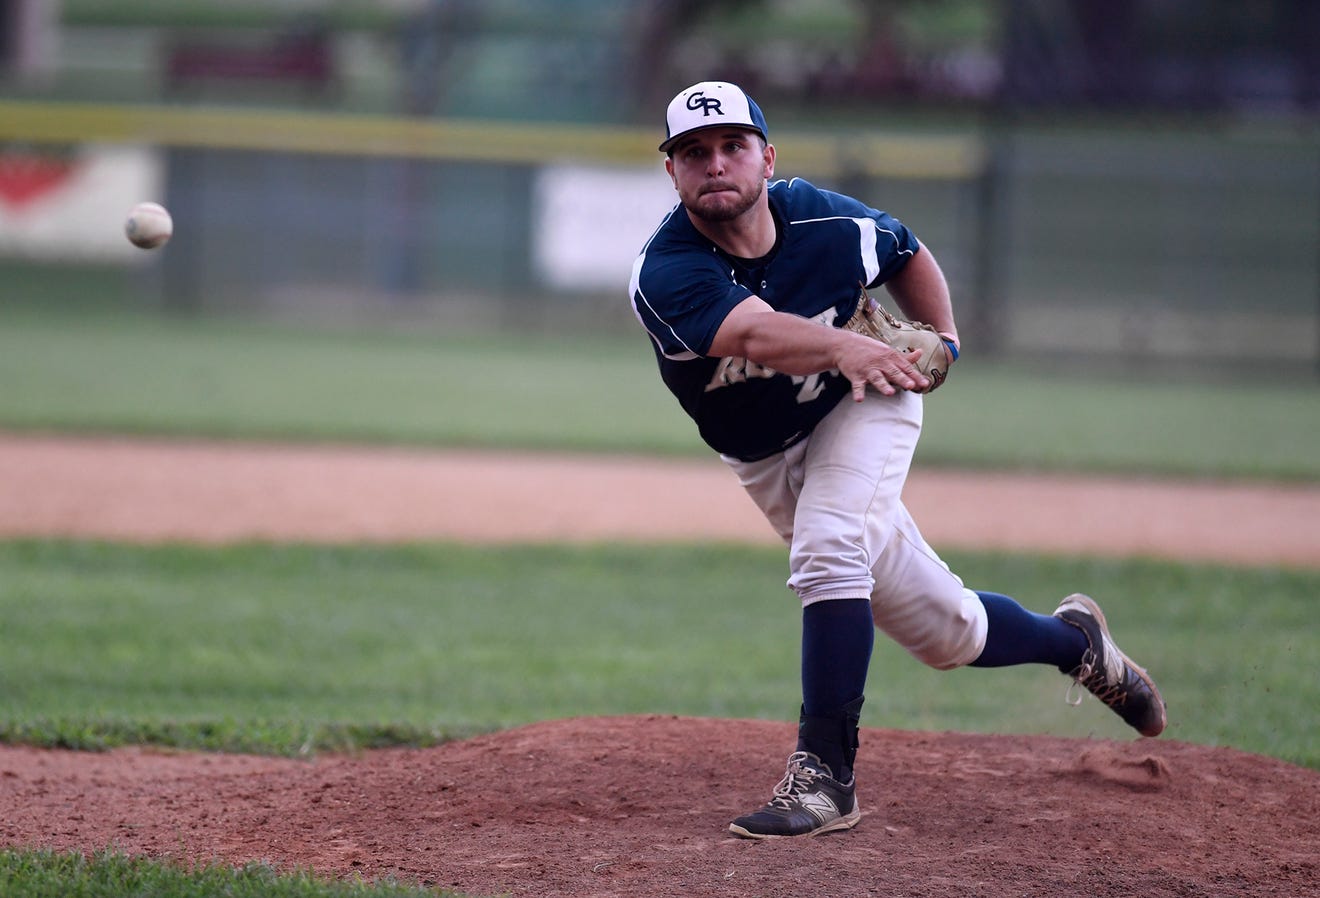 LOCAL BASEBALL Glen Rock wins to advance to Central League semifinals